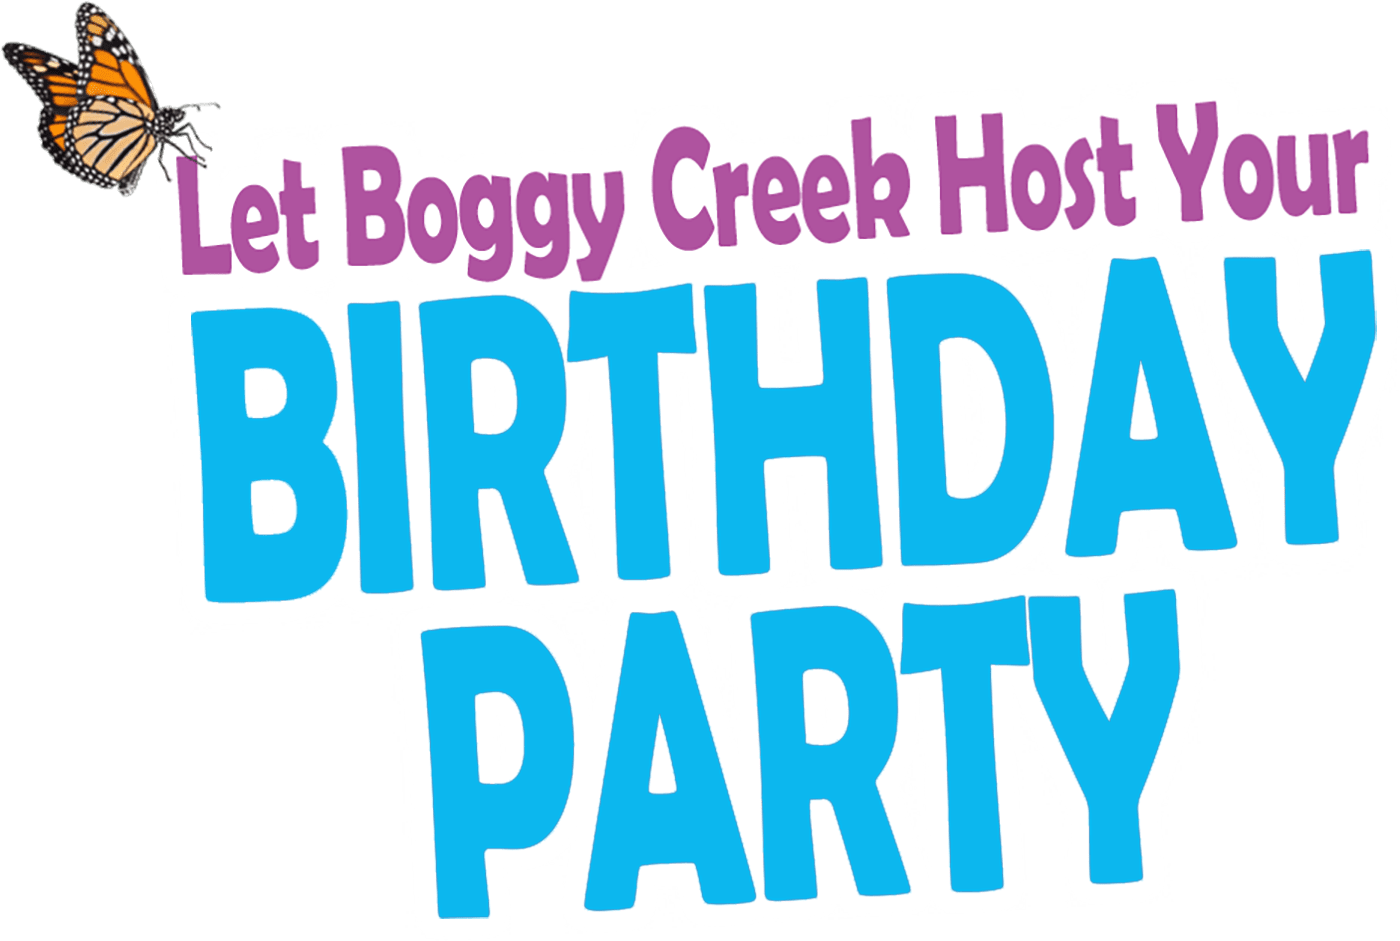 Let boggy creek host your birthday party image